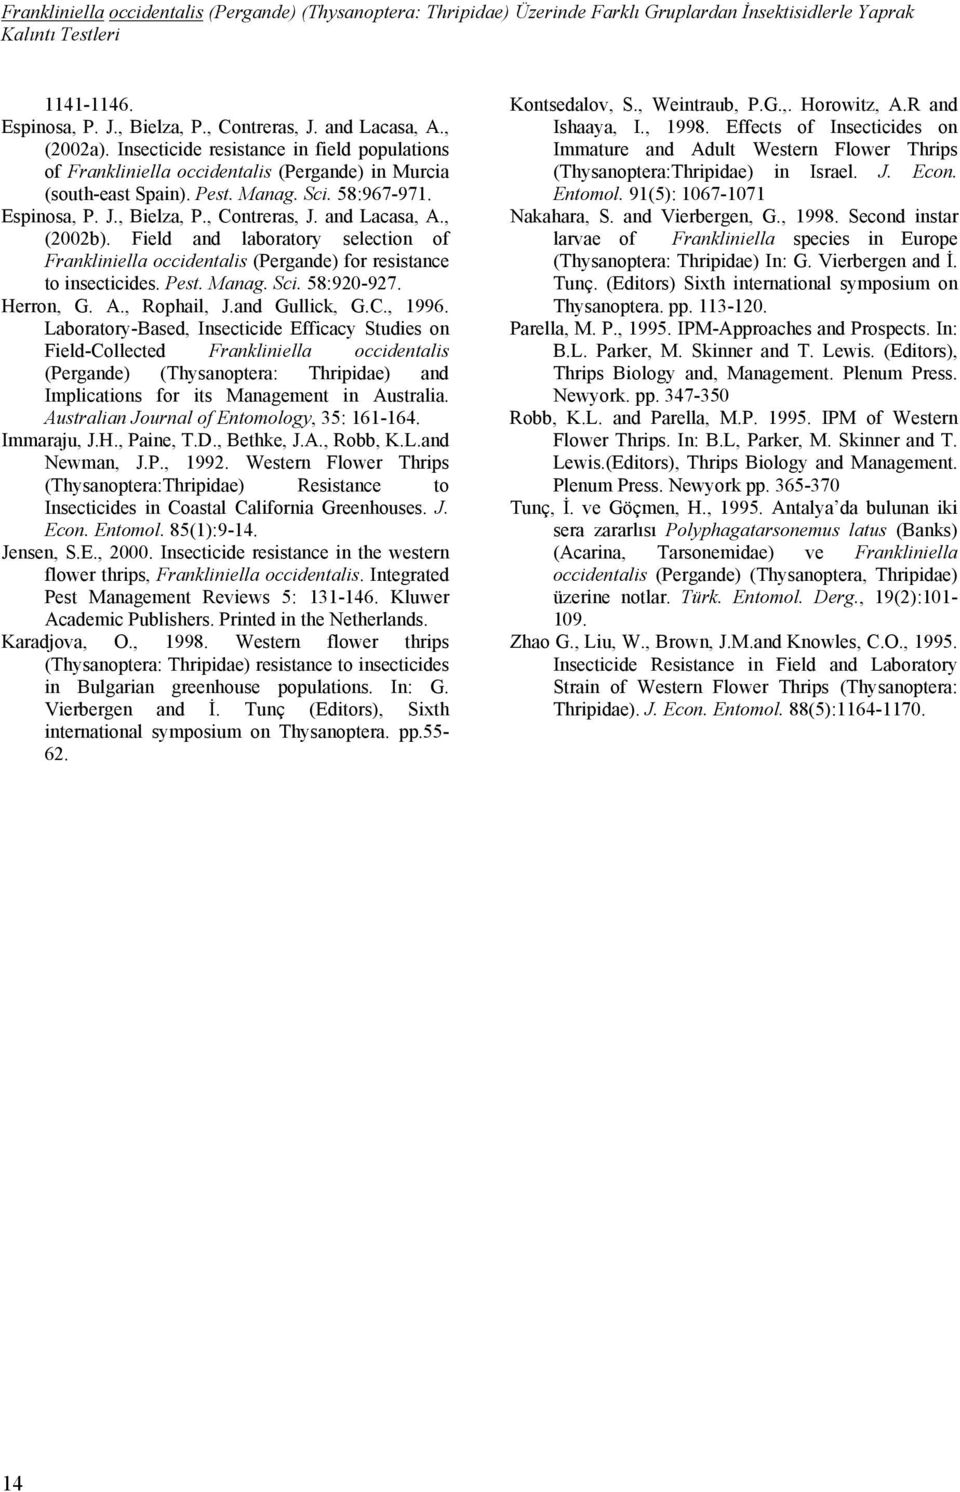 and Lacasa, A., (2002b). Field and laboratory selection of Frankliniella occidentalis (Pergande) for resistance to insecticides. Pest. Manag. Sci. 58:920-927. Herron, G. A., Rophail, J.and Gullick, G.